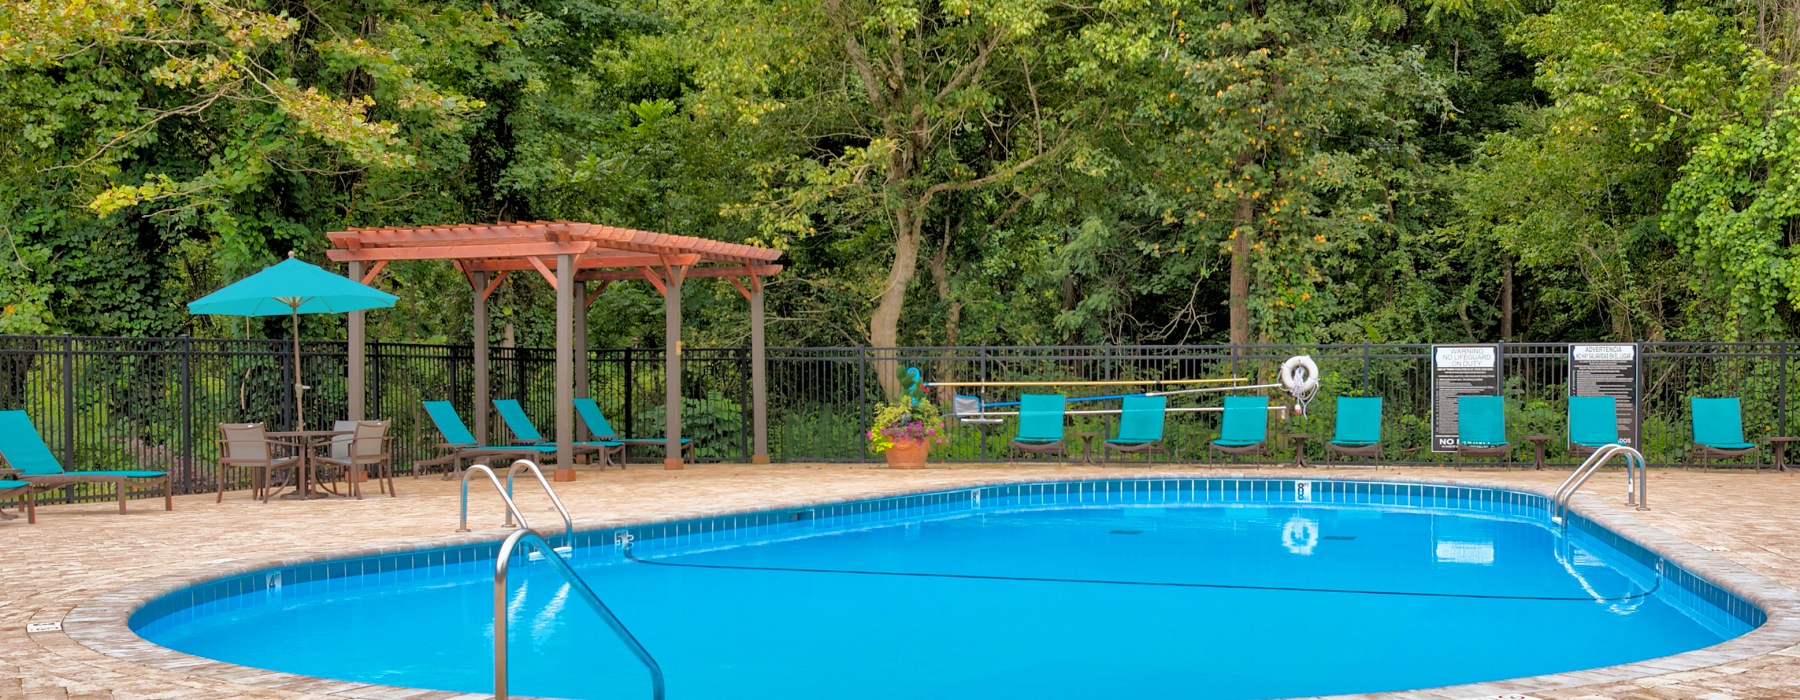 fenced in pool area with umbrella shaded tables and chairs